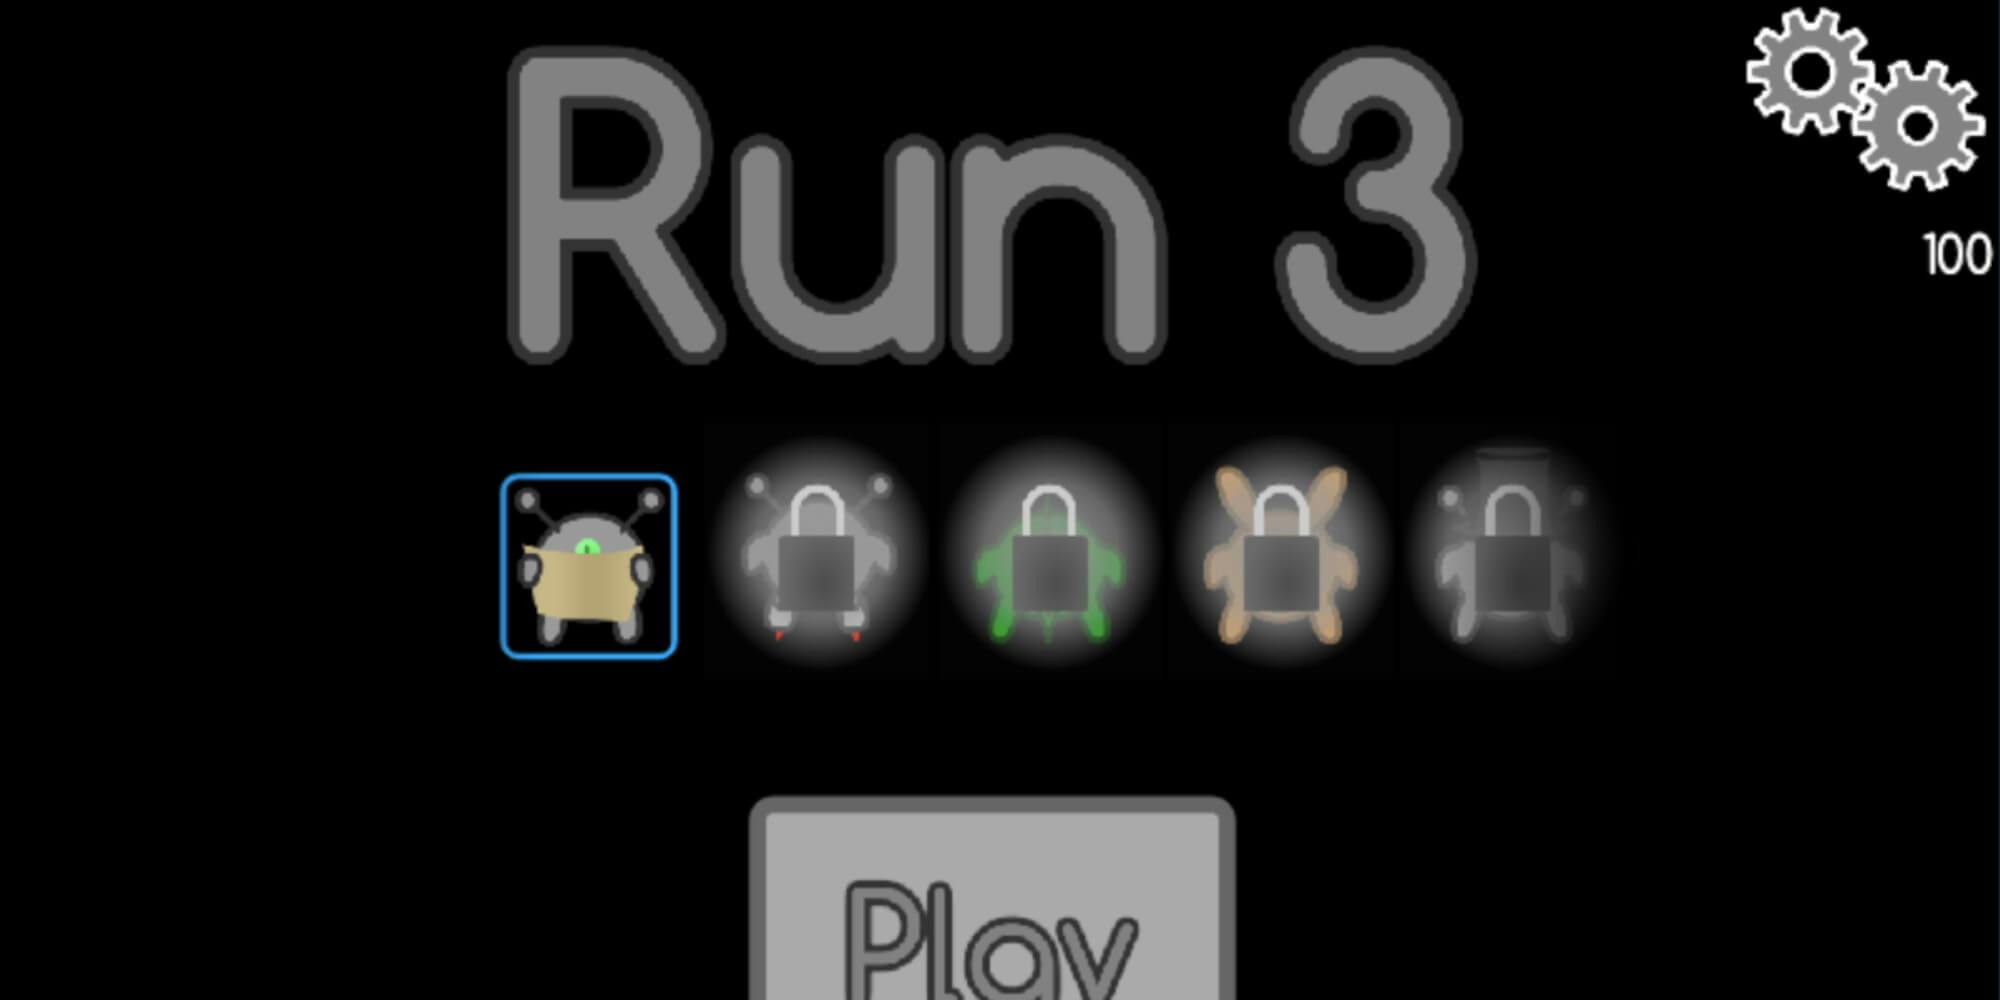 Run - Play it Online at Coolmath Games